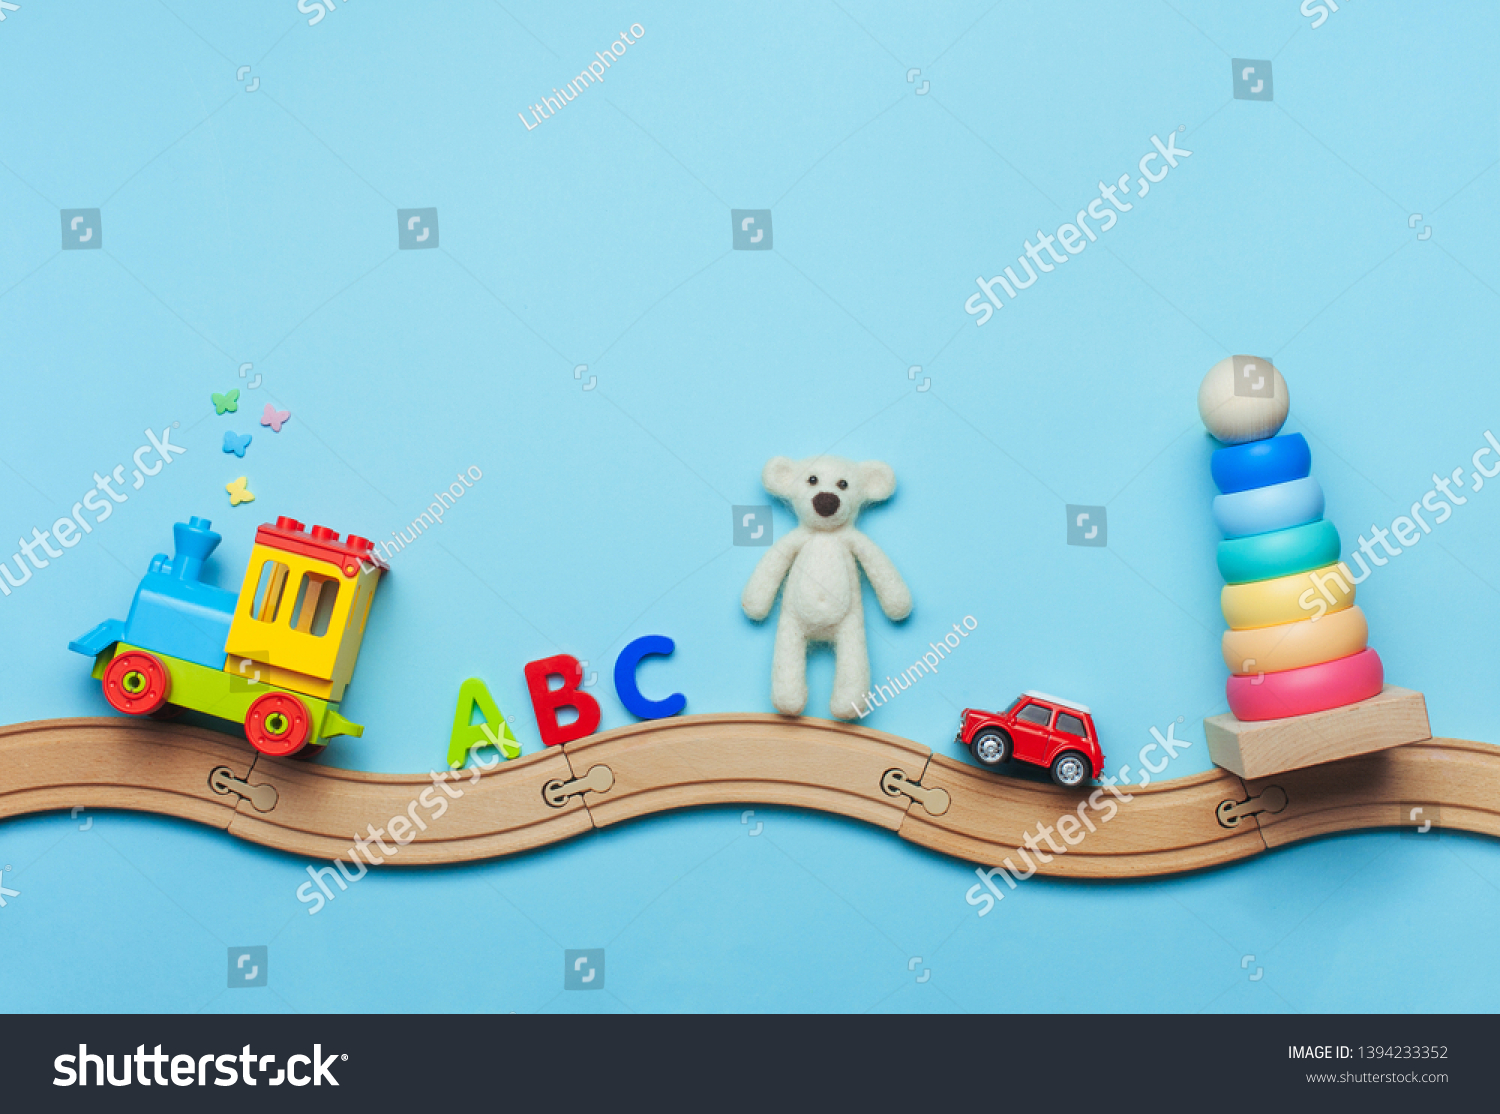 Toys background with copy space. Kids toys train, ABC letters, bear, car and pyramid on toy wooden railway on blue background with blank space for text. Top view, flat lay. #1394233352